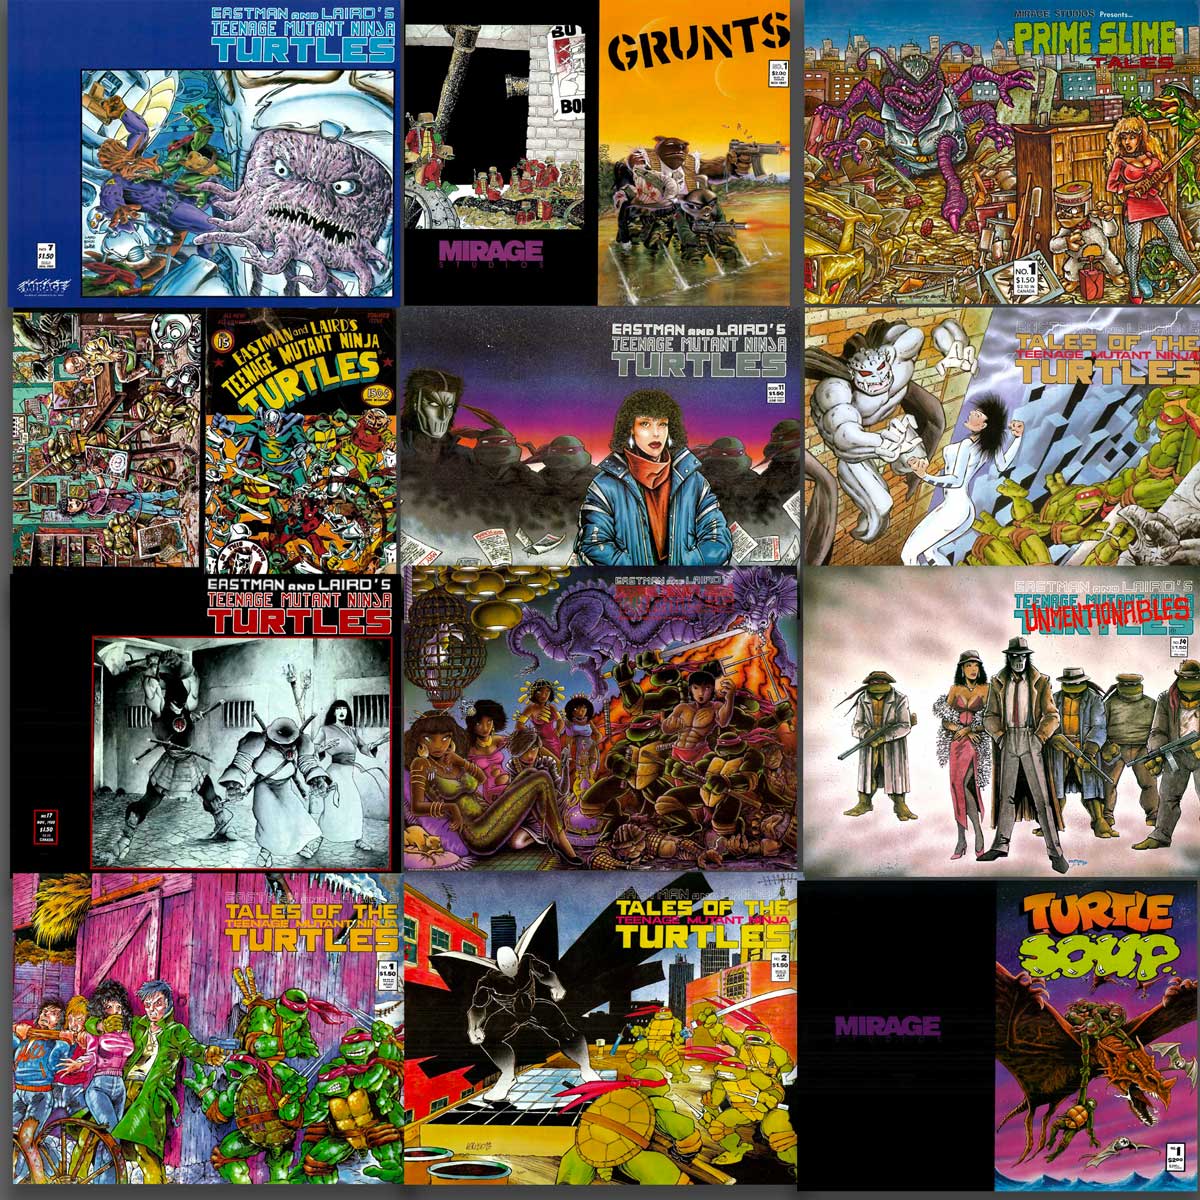 Vintage Mirage Studios Wraparound Covers and Newly Signed Prints Available Now